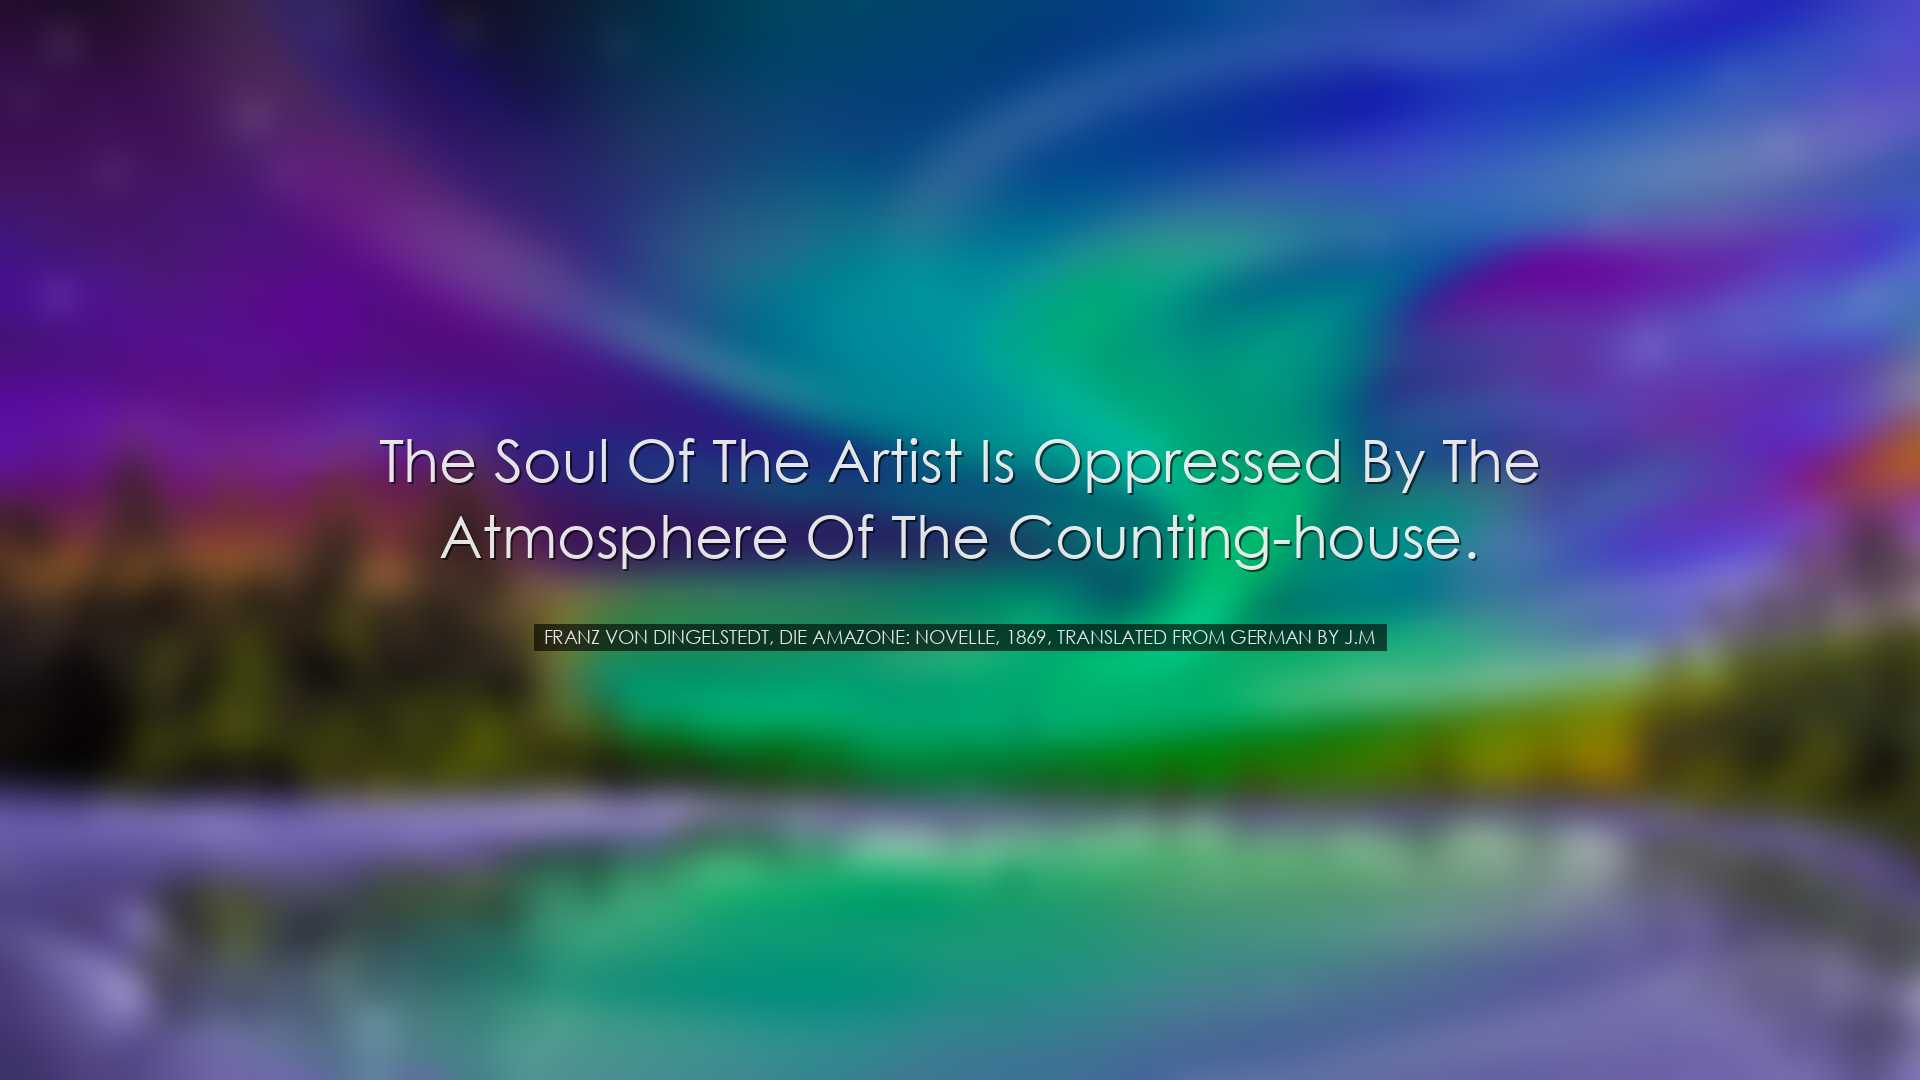 The soul of the artist is oppressed by the atmosphere of the count